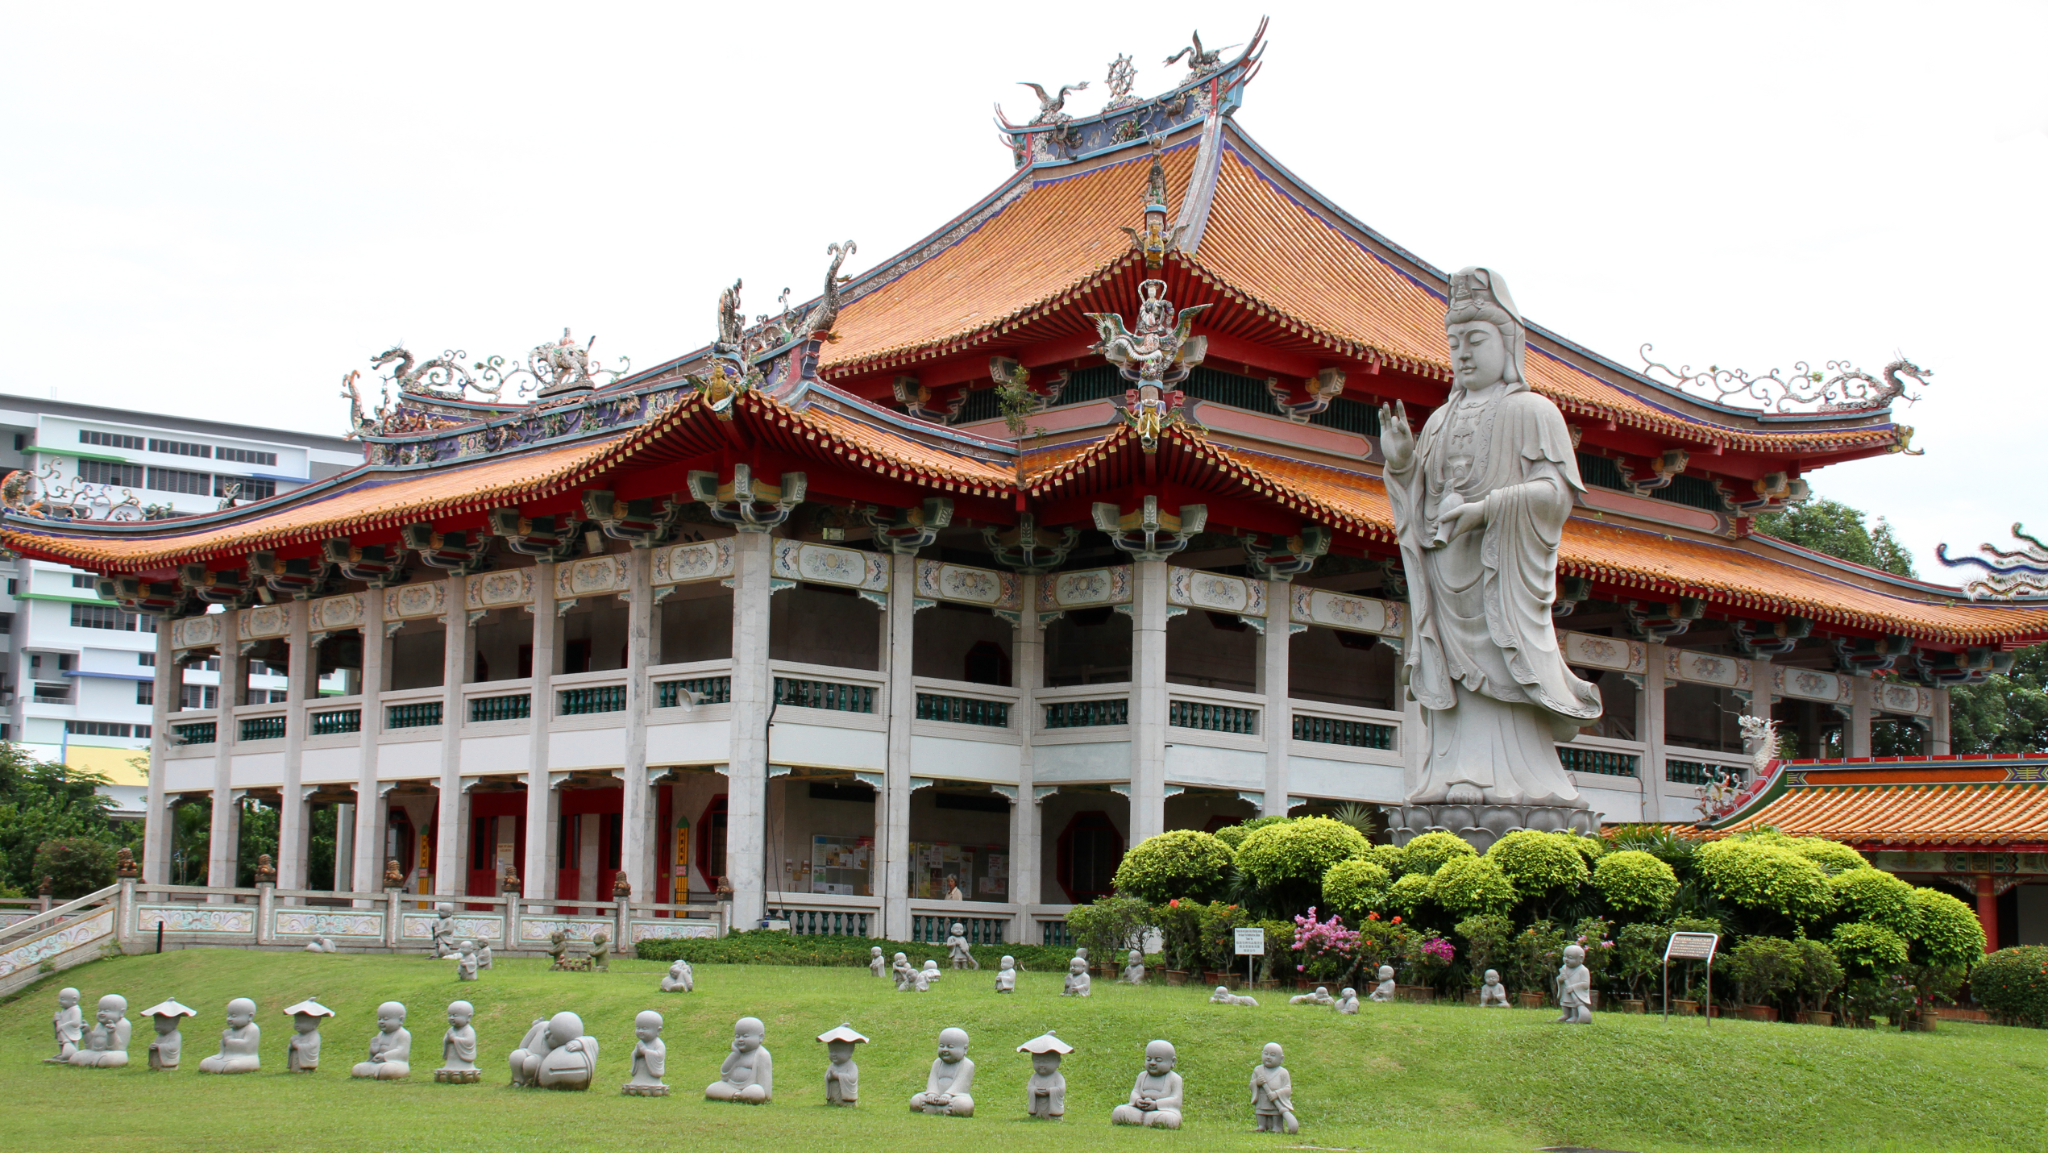 10 Must-See Off-the-Beaten-Path Architecture in Singapore - Kong Meng San Phor Kark See Monastery (or Bright Hill Temple)